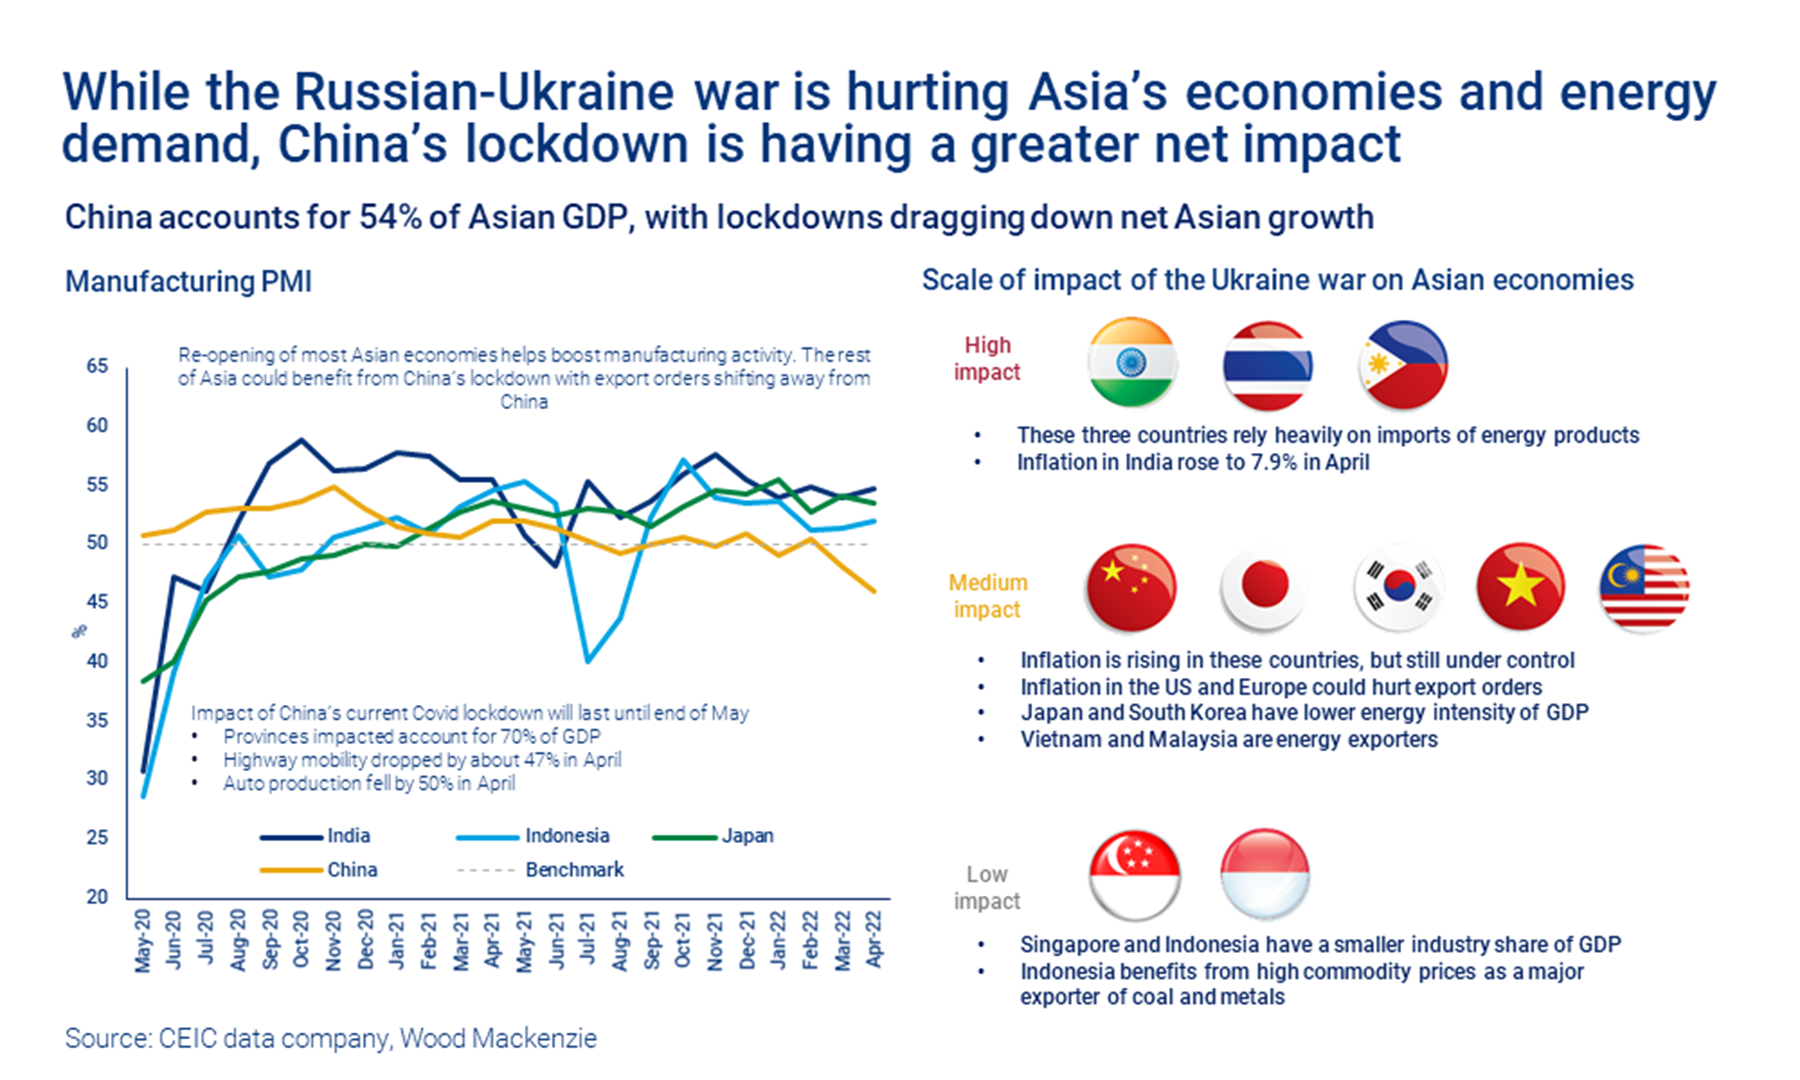 Chart shows while the Russian-Ukraine war is hurting Asia's economies and energy demand, China's lockdown is having a great net impact